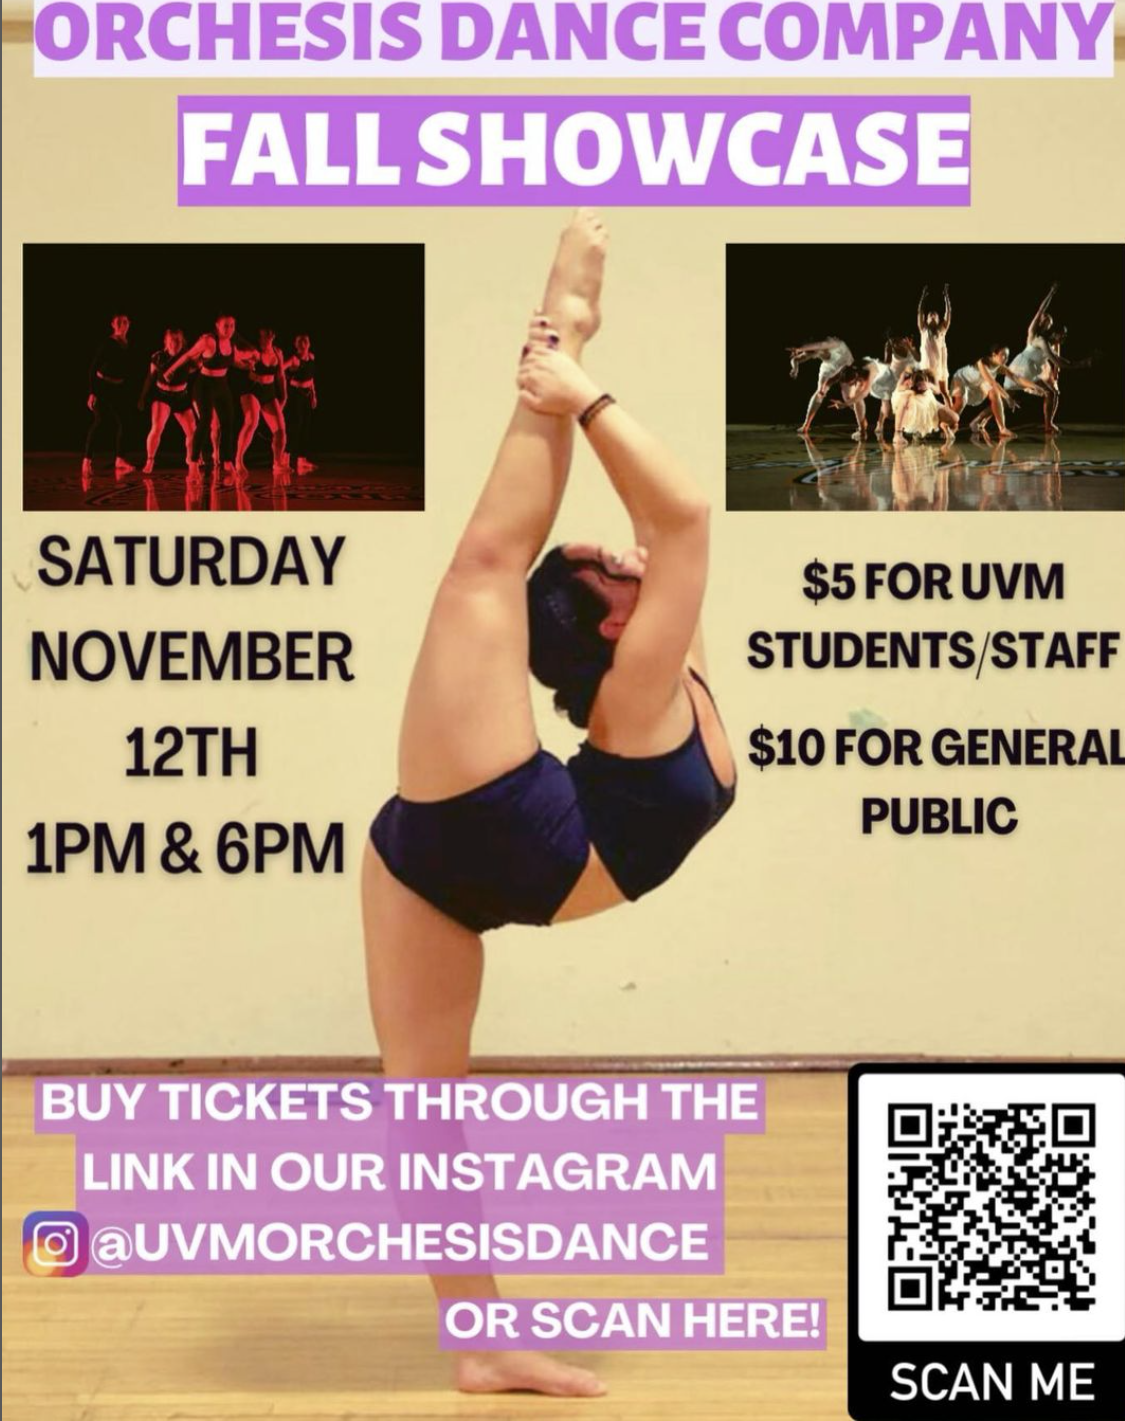 graphic for orchesis dance company fall showcase